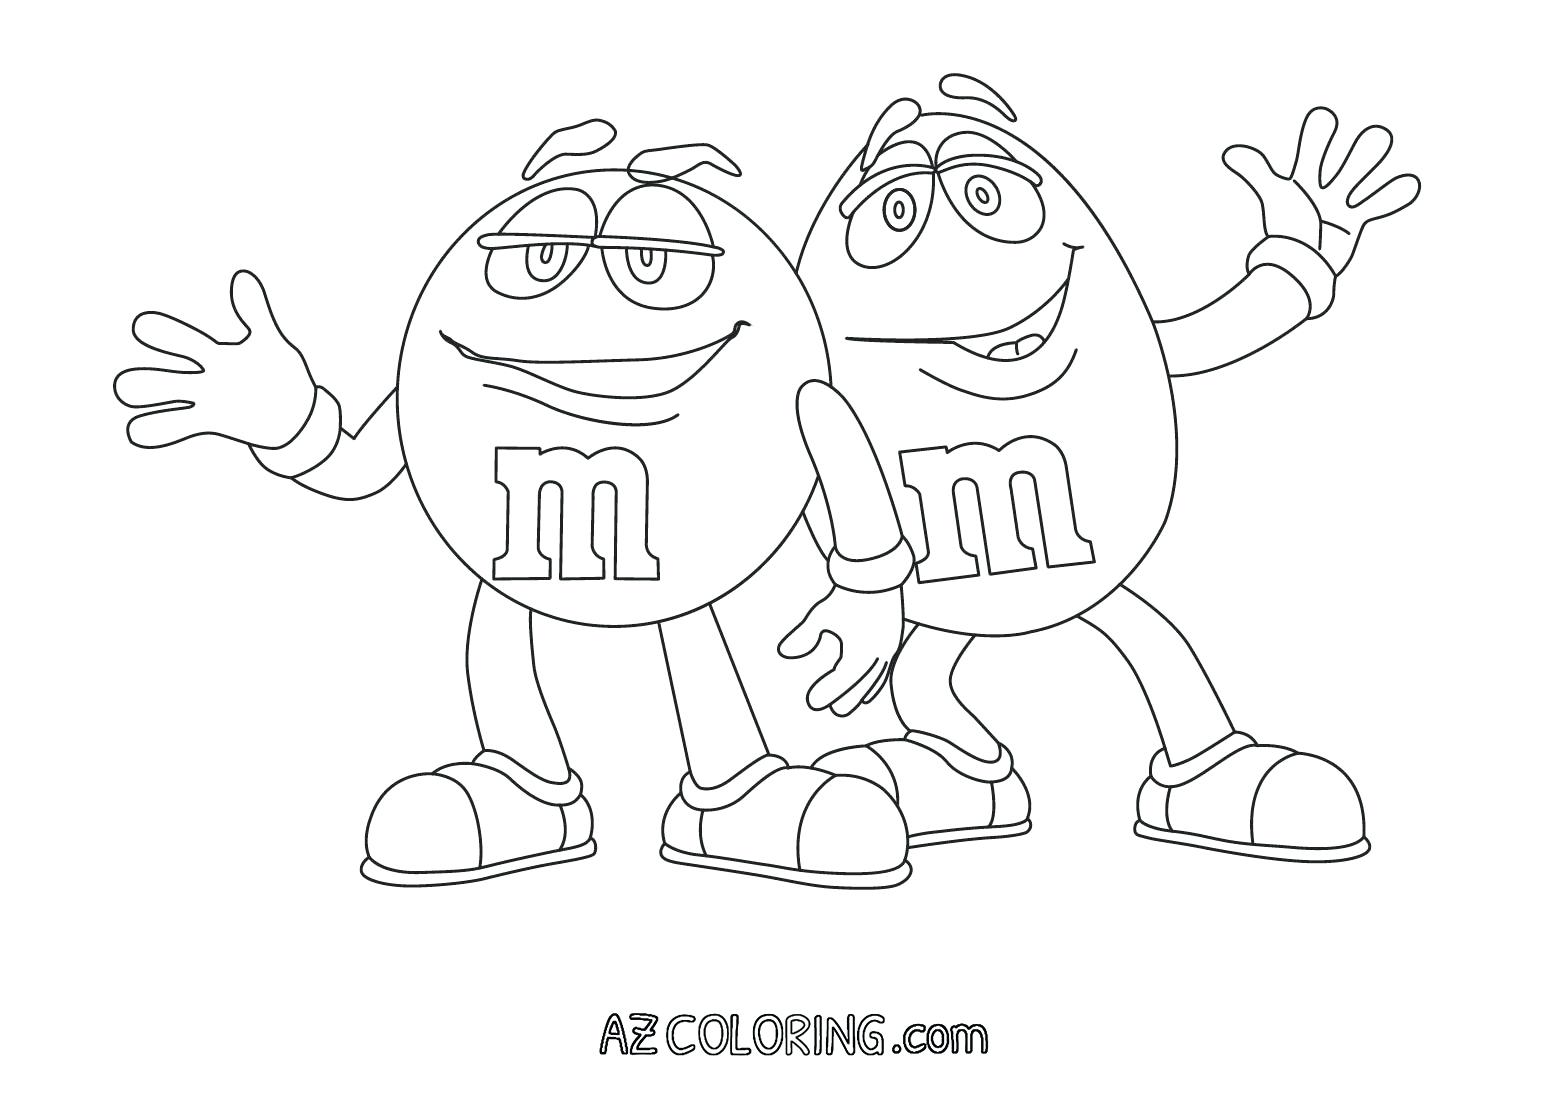 Cute M M Candy Coloring Pages with simple drawing